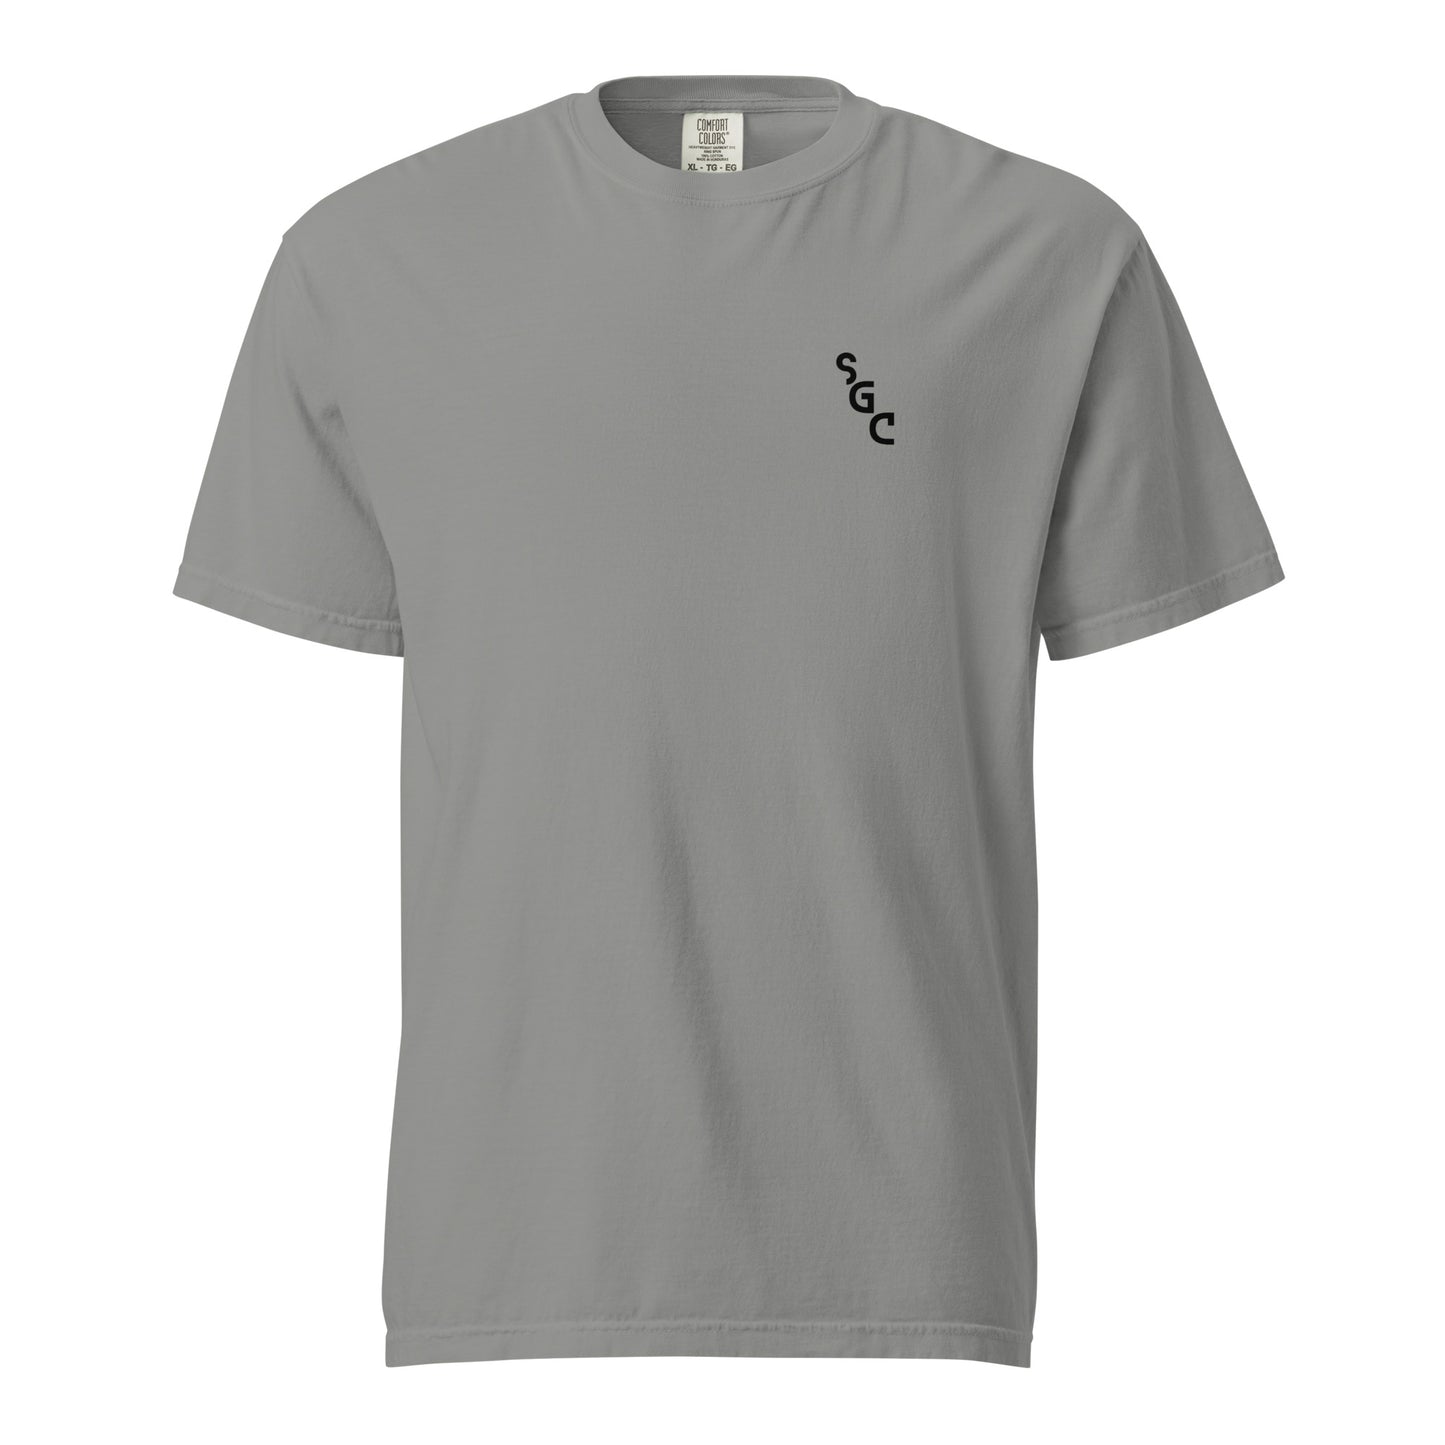 Golf Nutrition Facts Tee